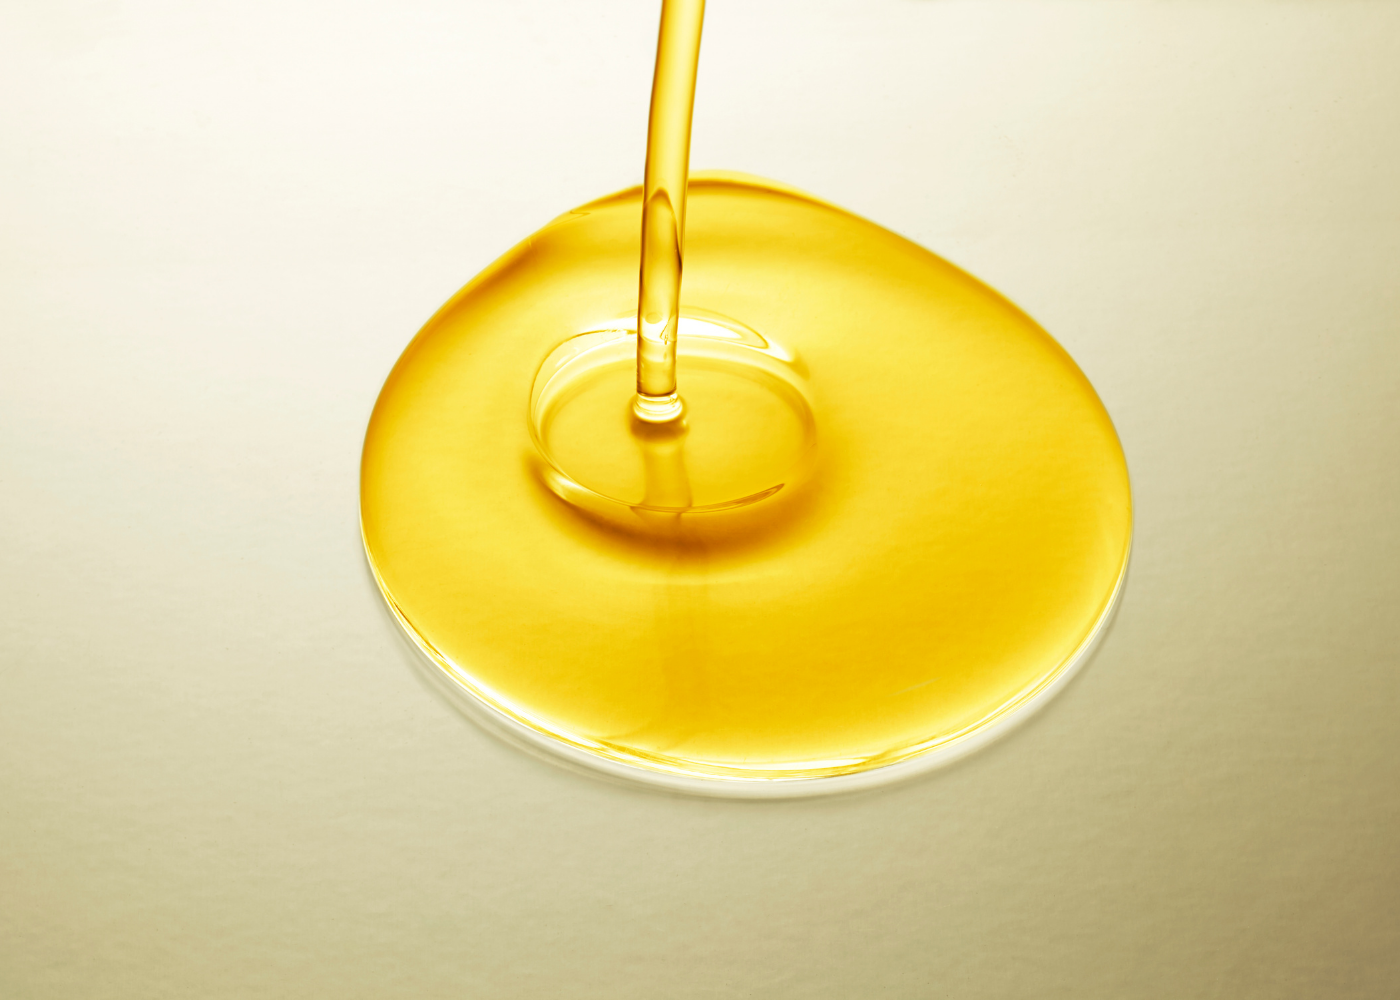 Ingredient Spotlight: Oils we use and what they do